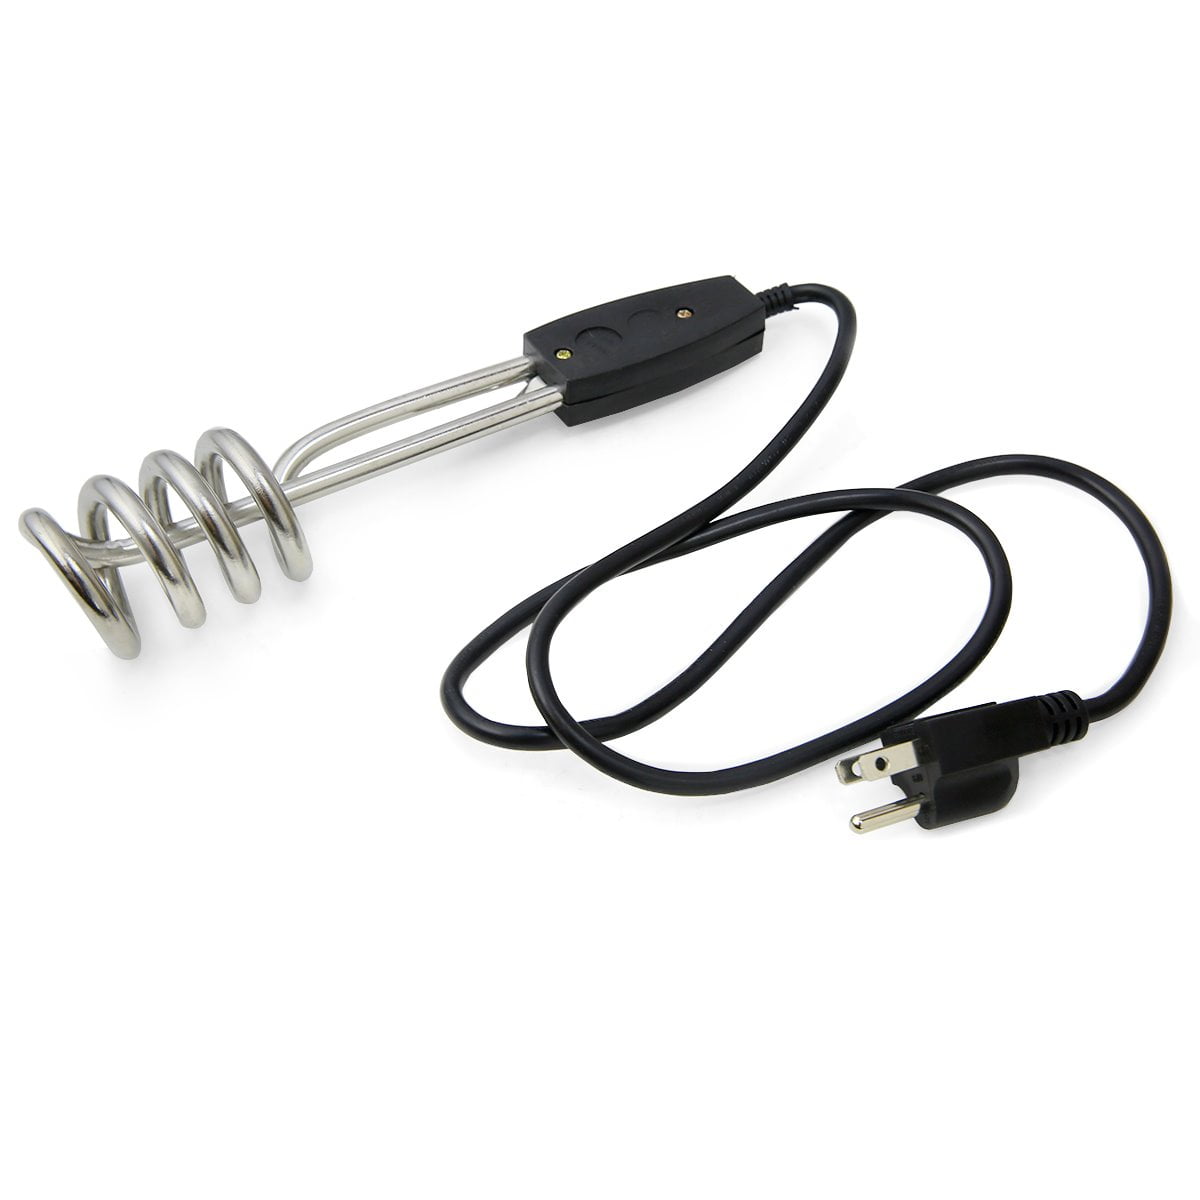 Portable Water Heater Boiler Electric Immersion Element Travel & Hook 